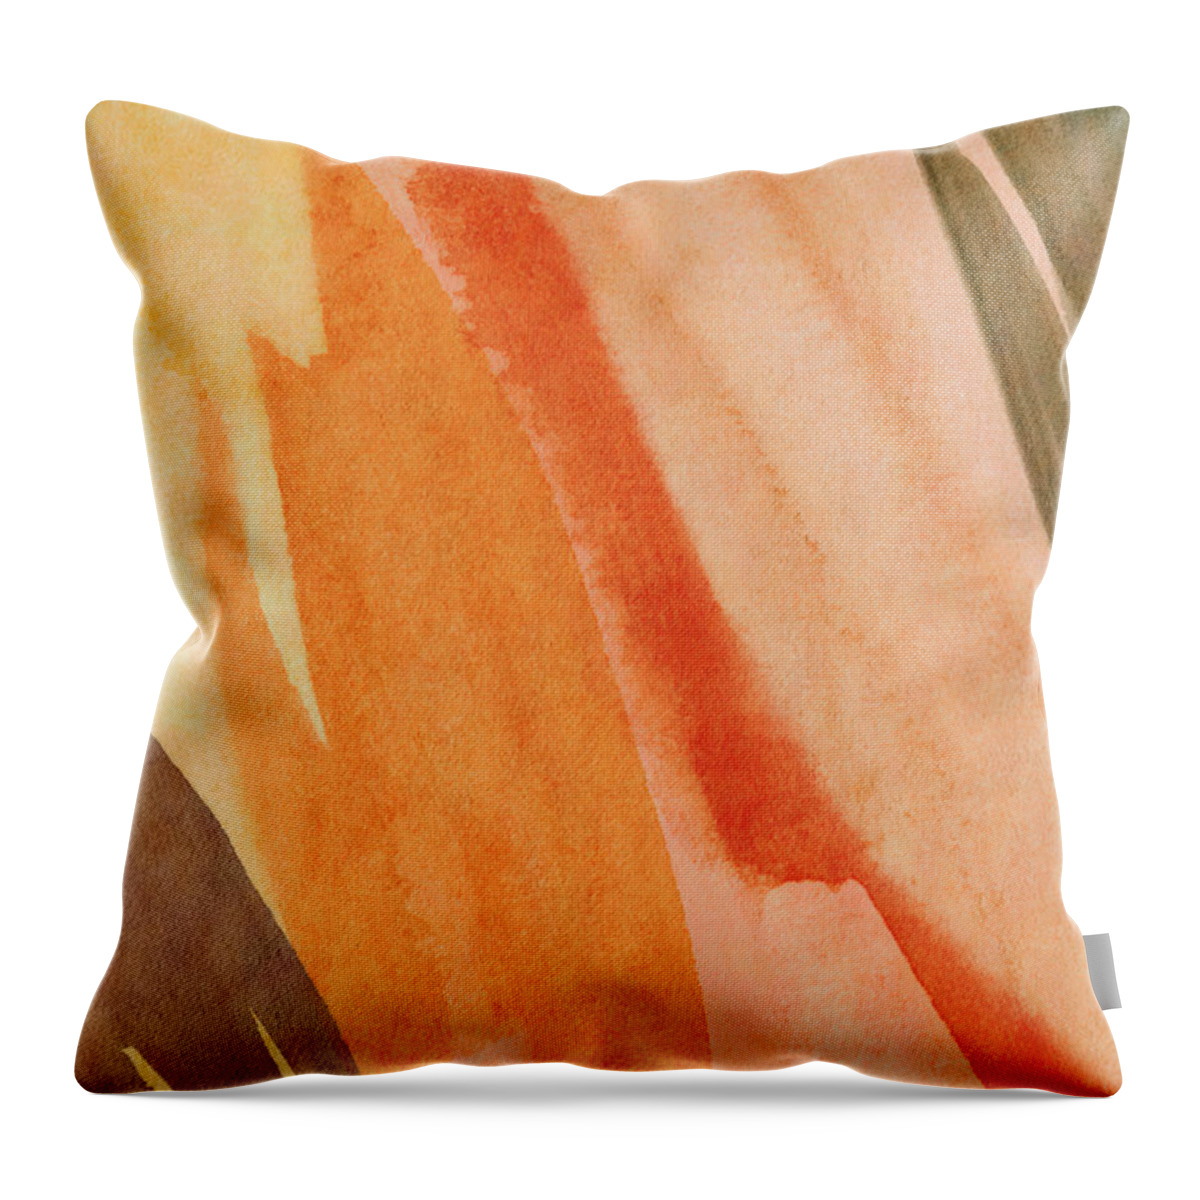 Abstract Throw Pillow featuring the mixed media Unfolding- Art by Linda Woods by Linda Woods